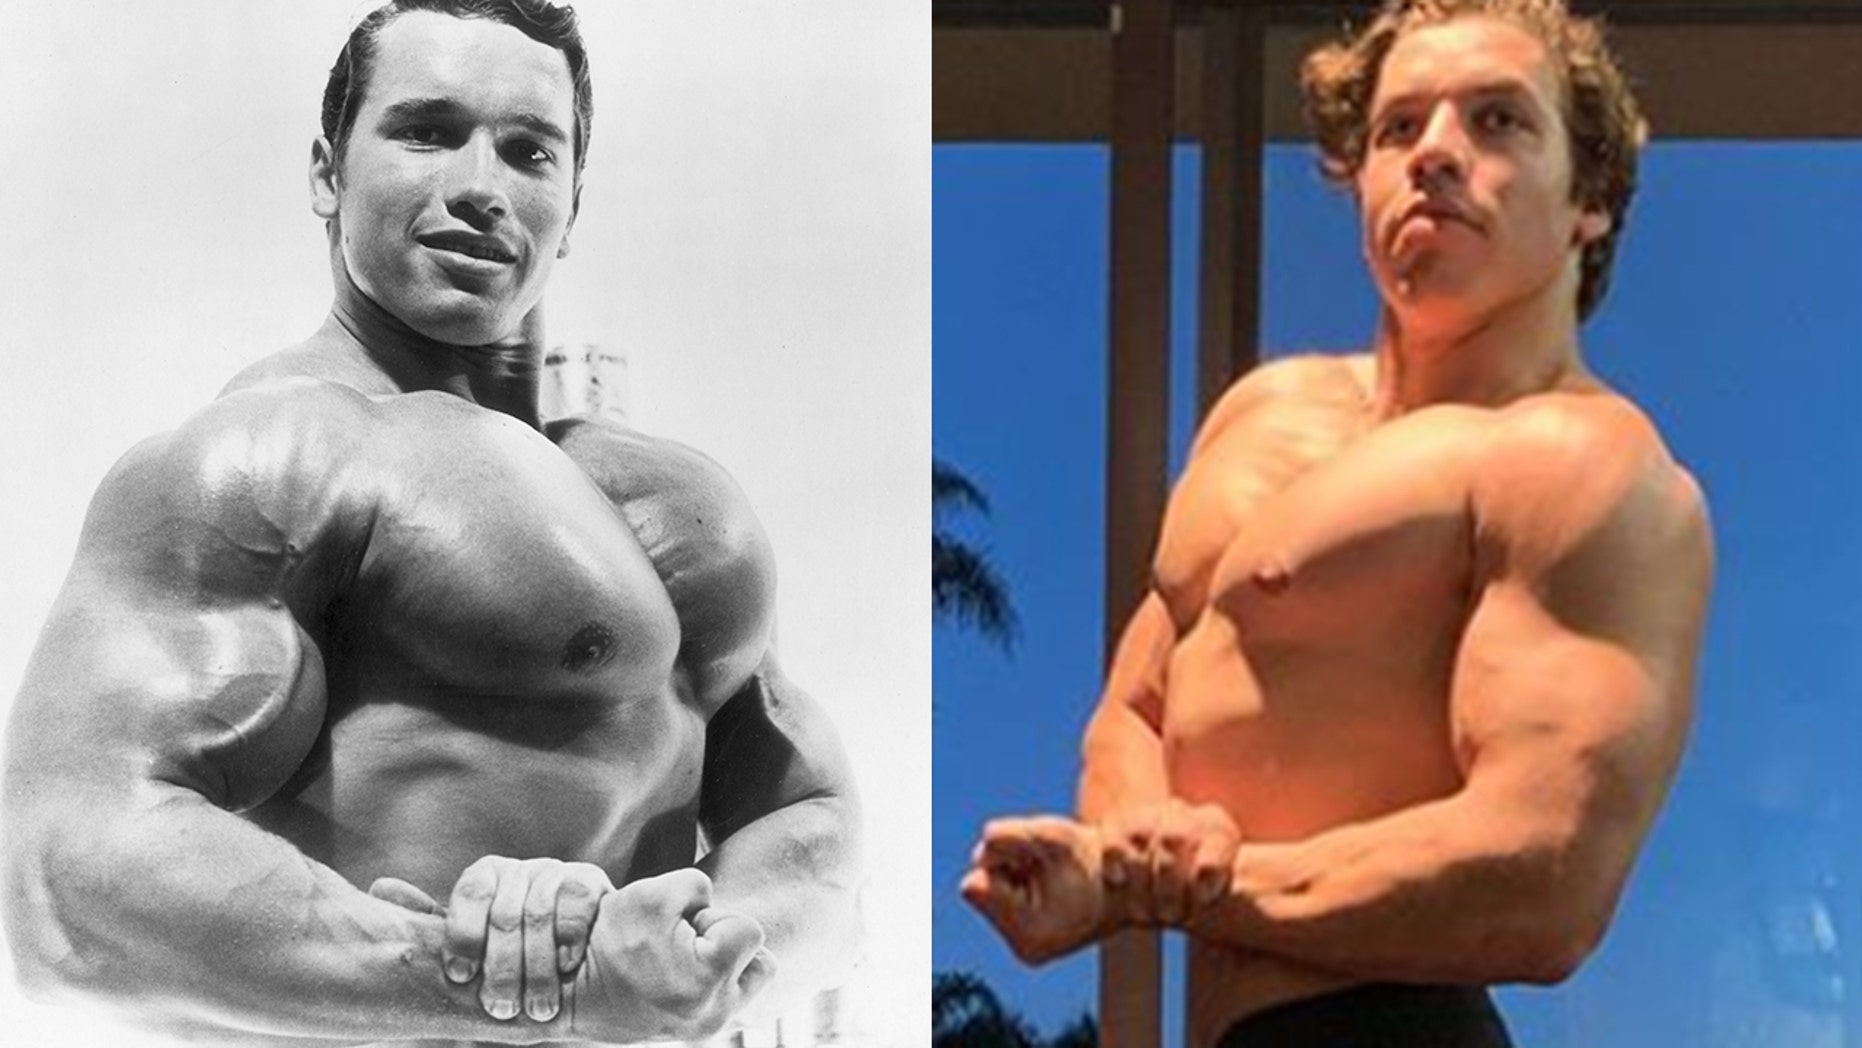 Arnold Schwarzenegger’s son recreates another one of his famous father’s bodybuilding poses